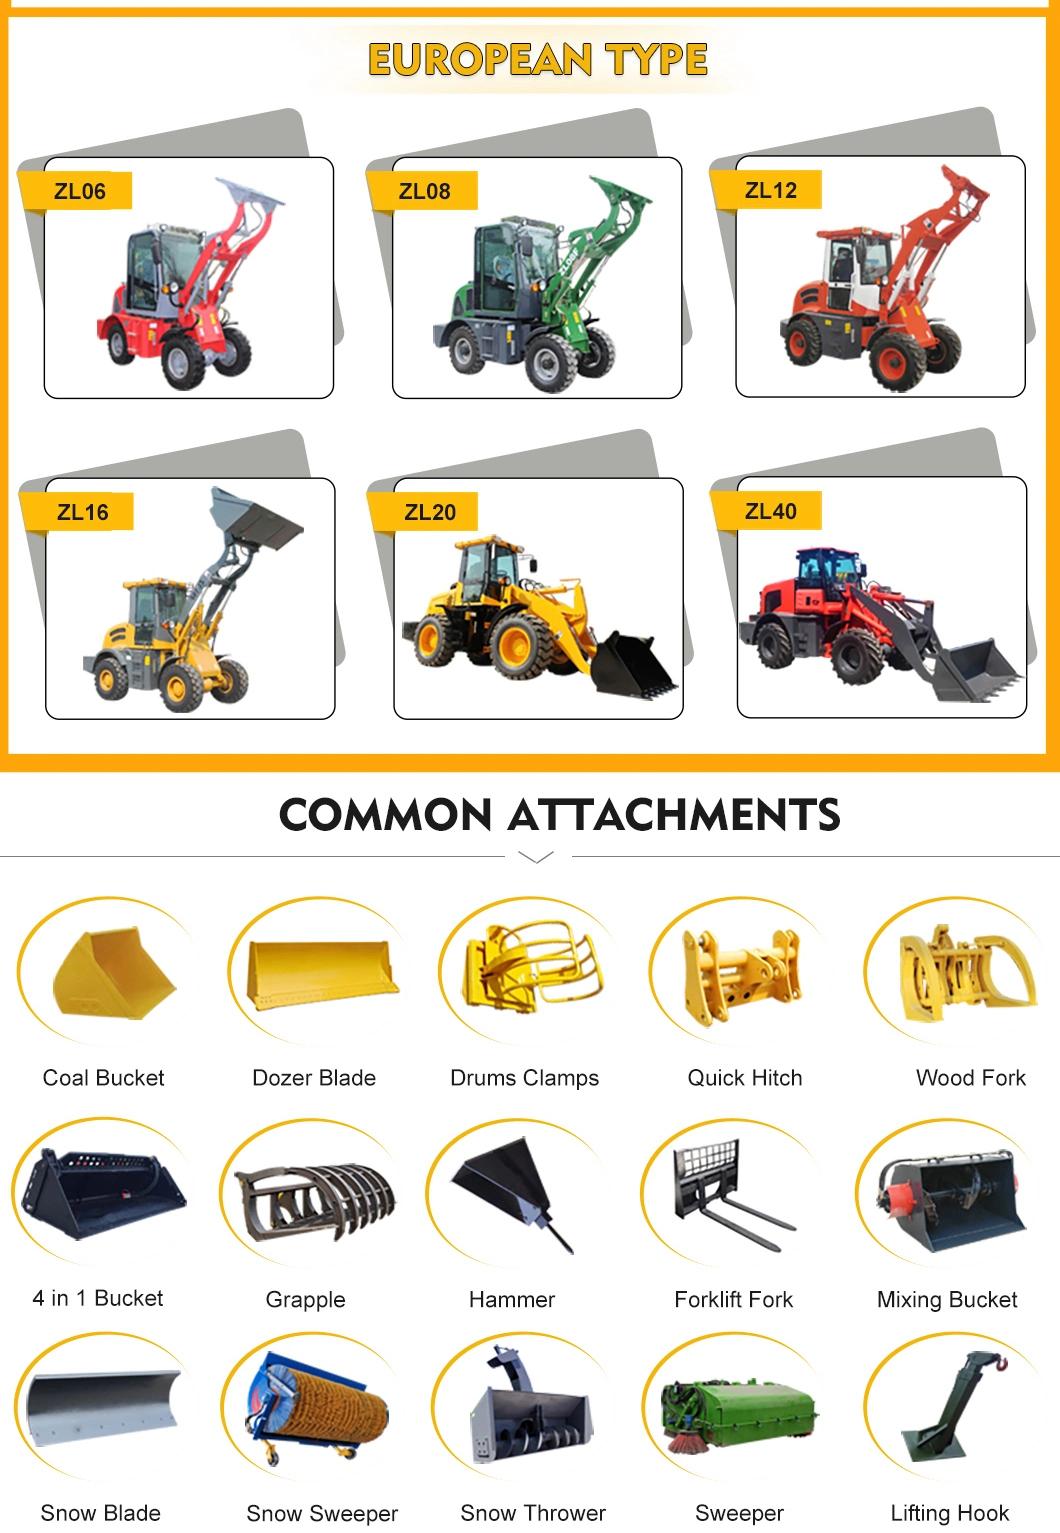 High Loading 4 Wheel Drive Self Loader Lorry Truck Front Loader Price with Ce